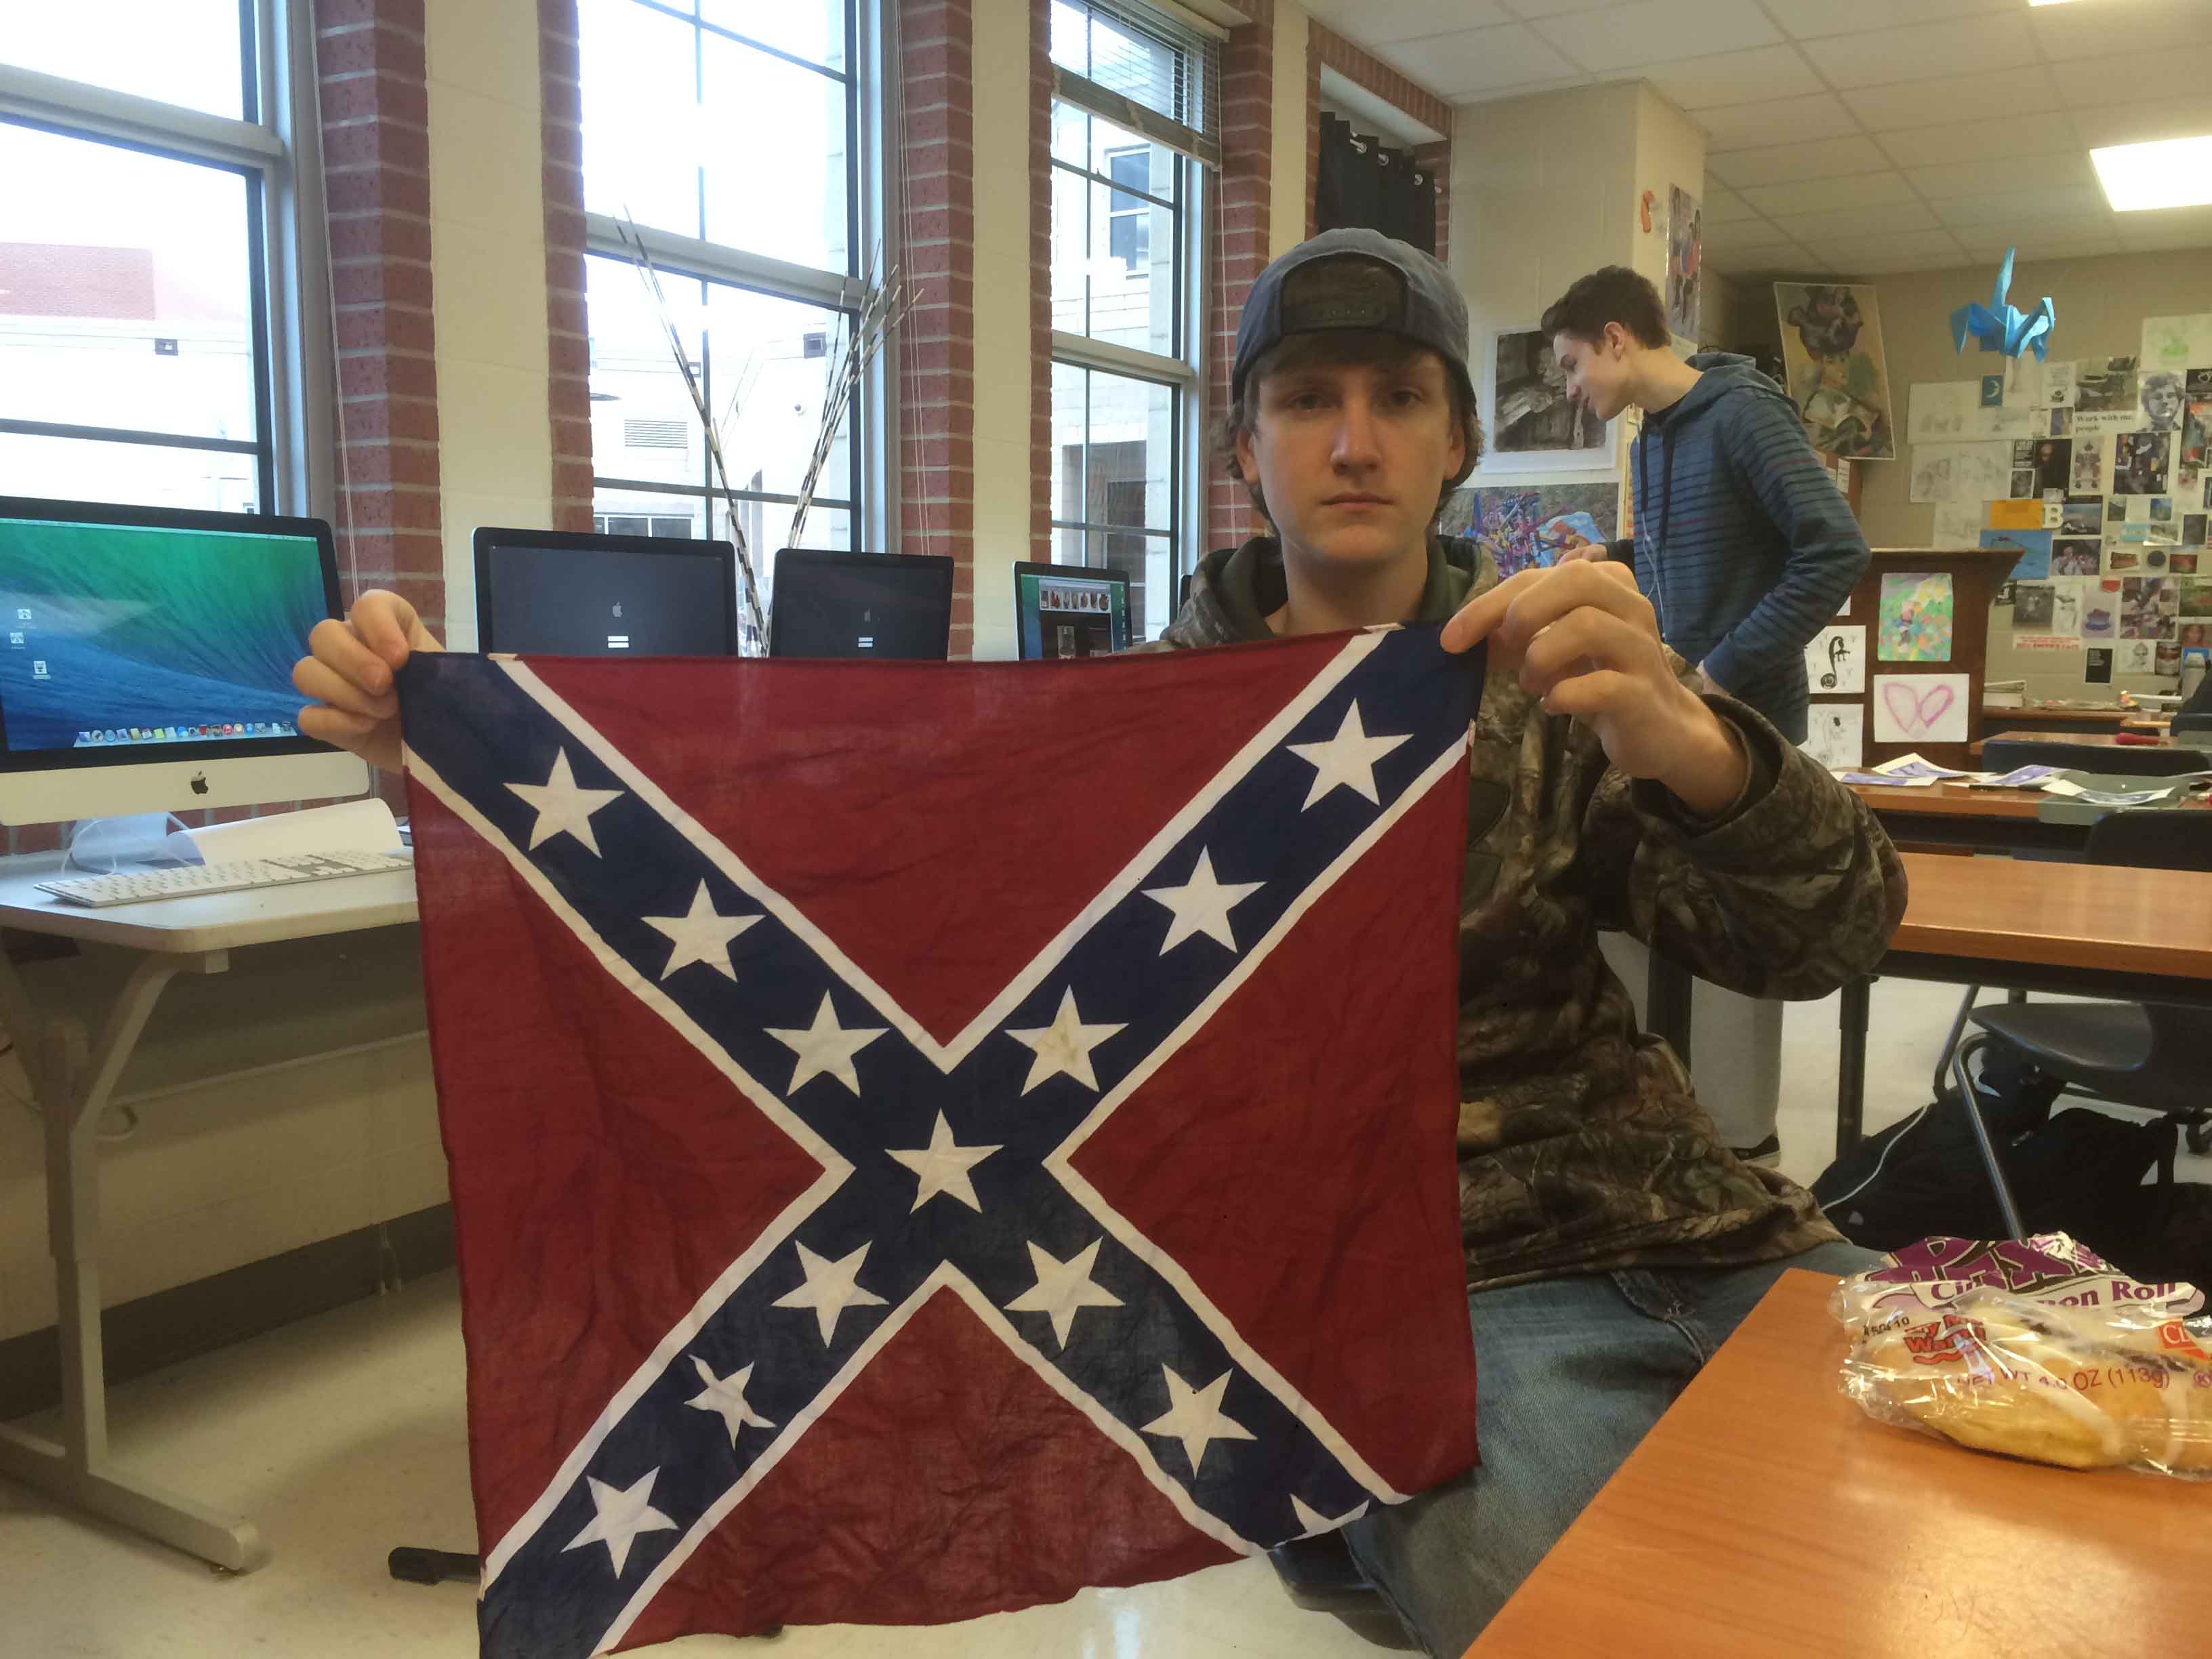 Sophomore Davis DeShields displays a small Confederate flag, however school administration has determined the flag is no longer allowed on campus.